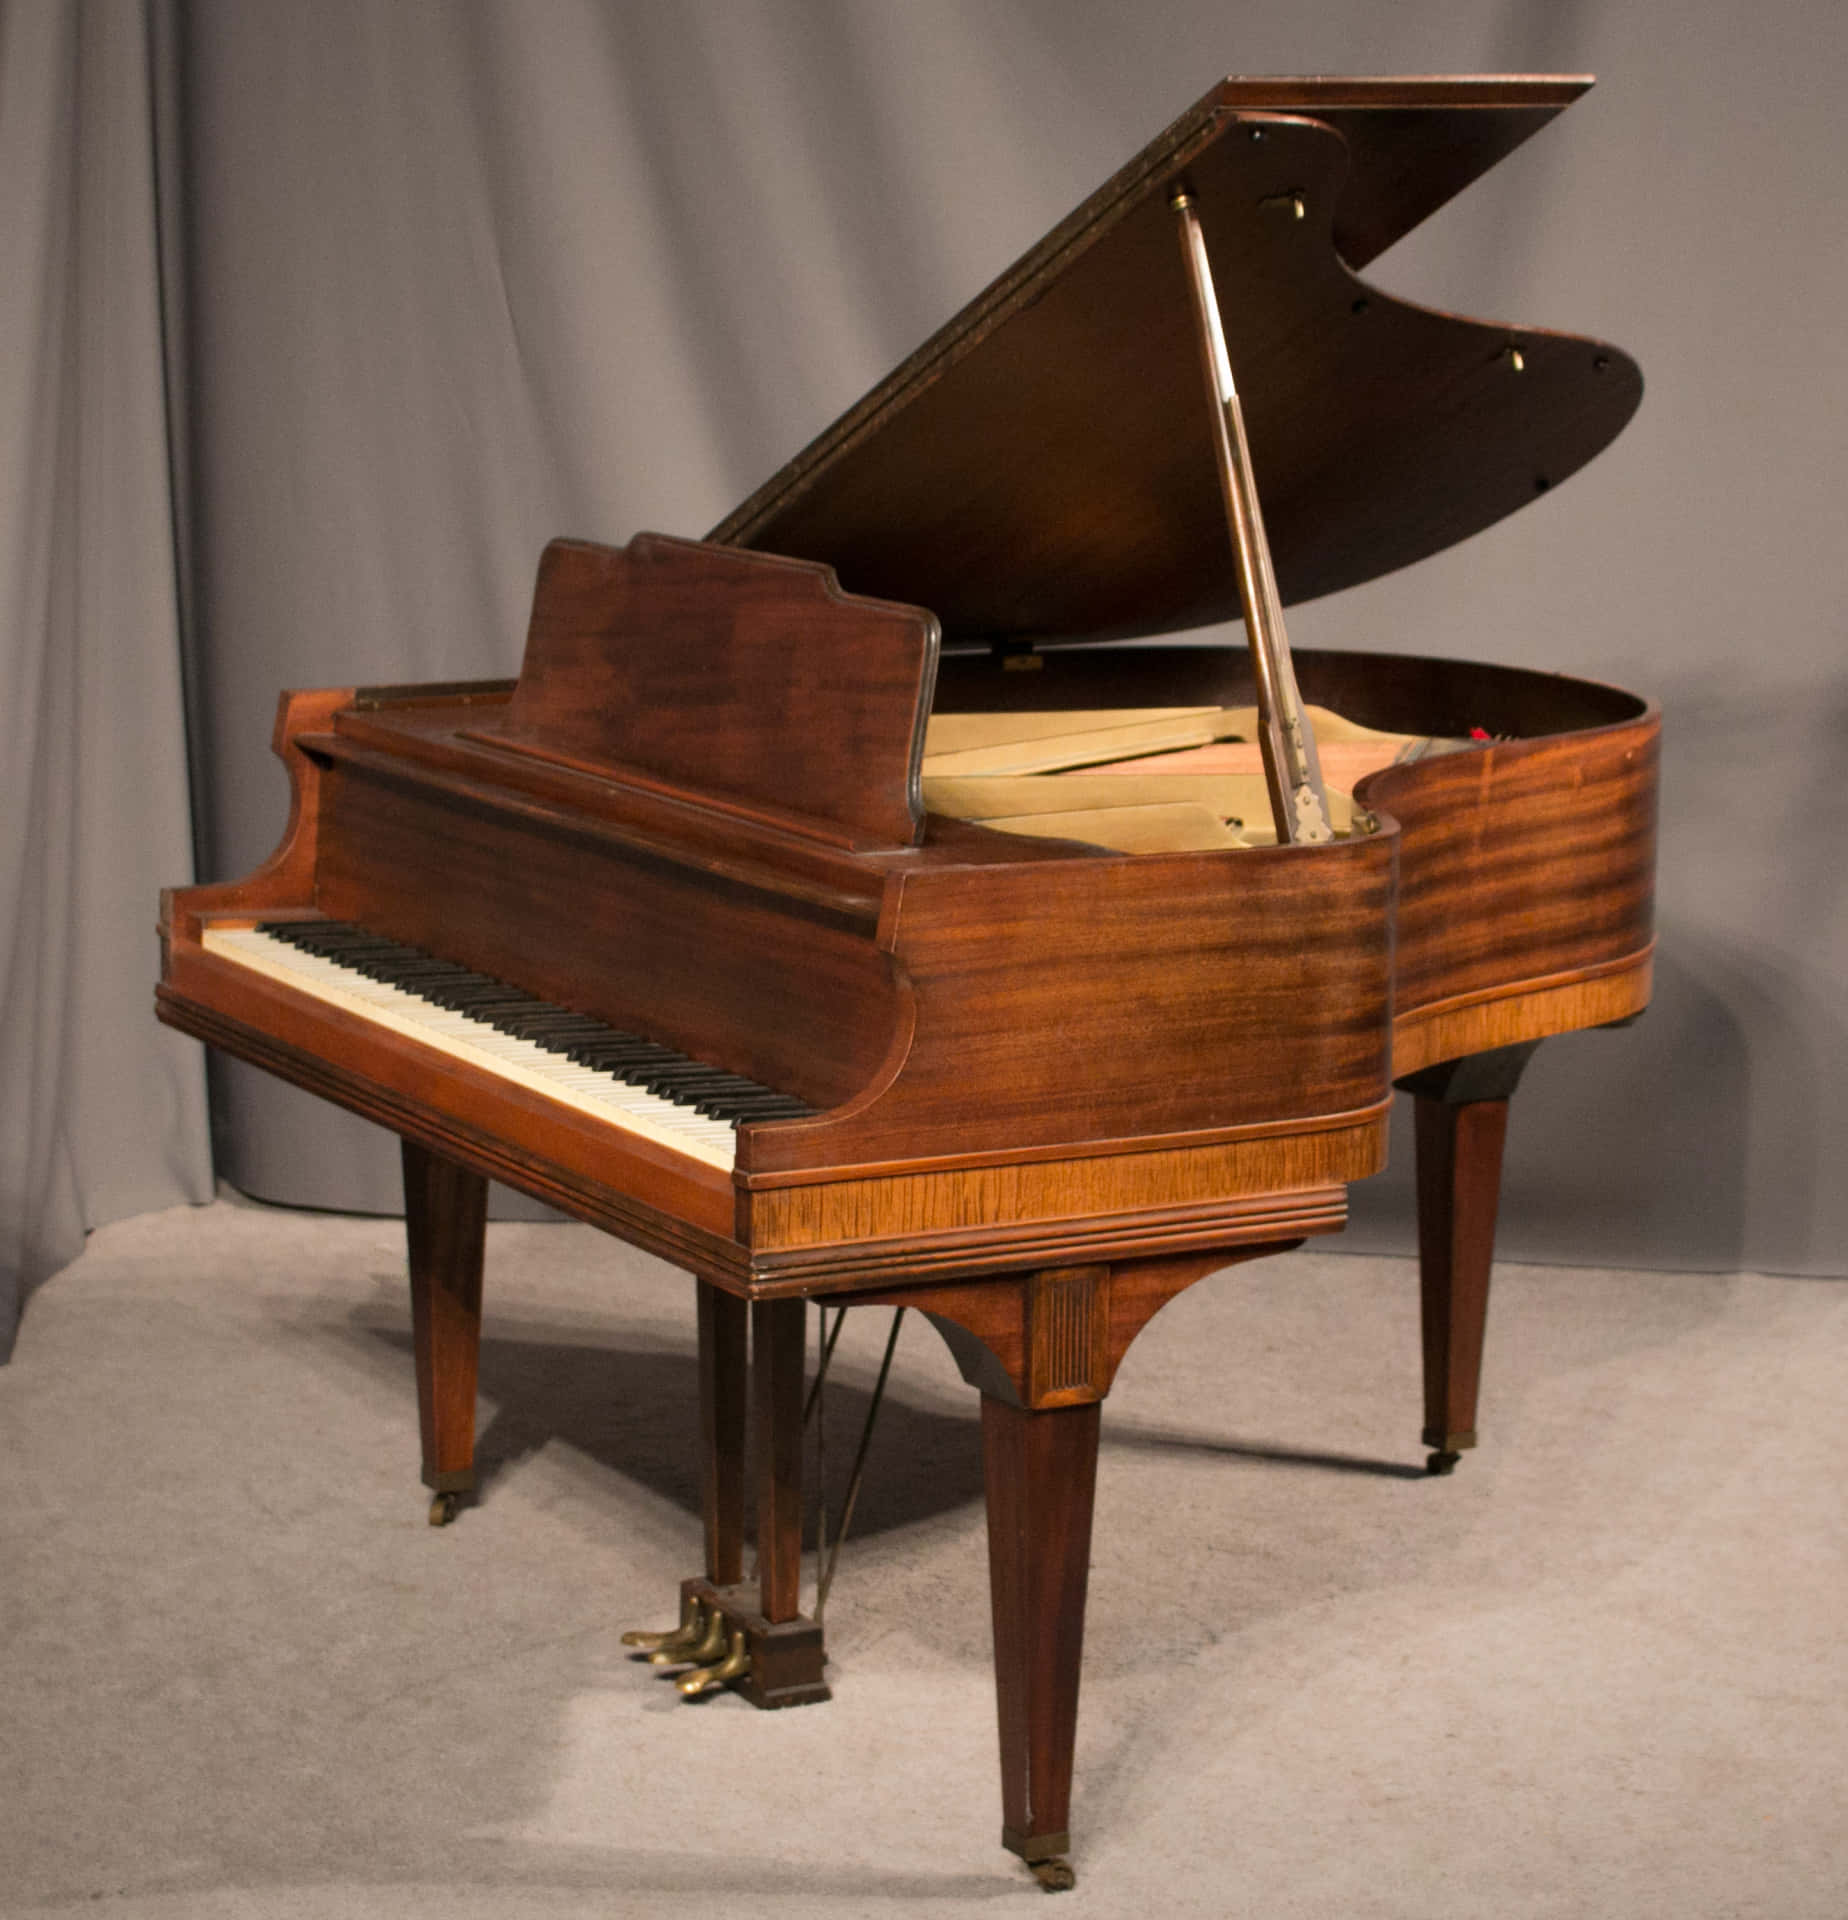 A beautiful acoustic piano surrounded by the warmth of natural wood